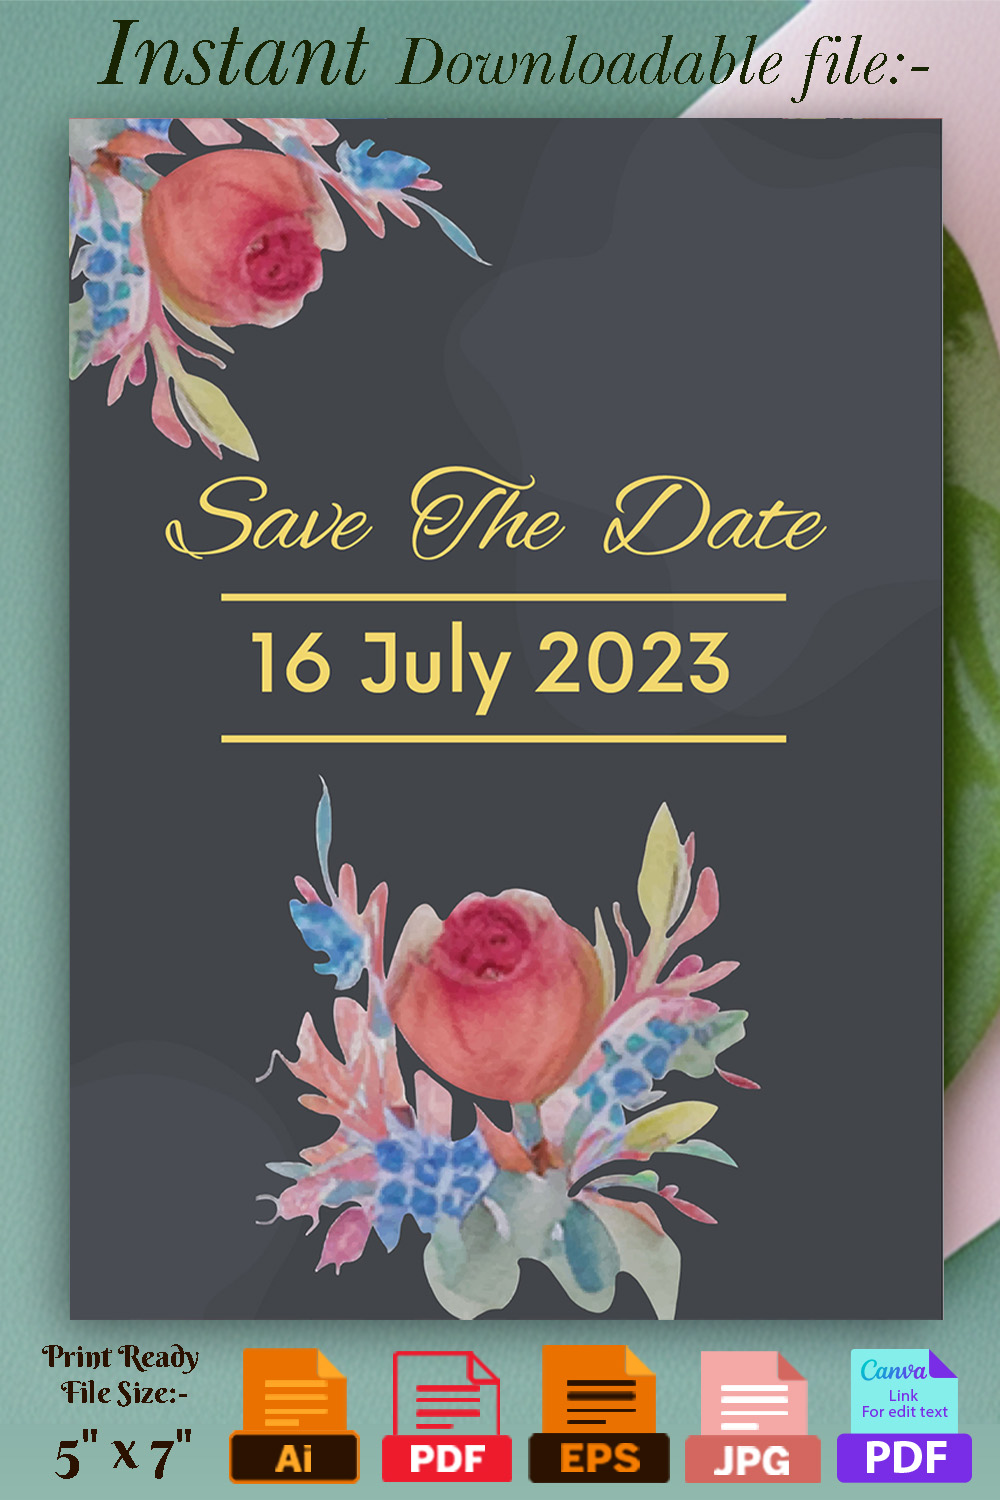 Image with unique wedding invitation card with flowers.